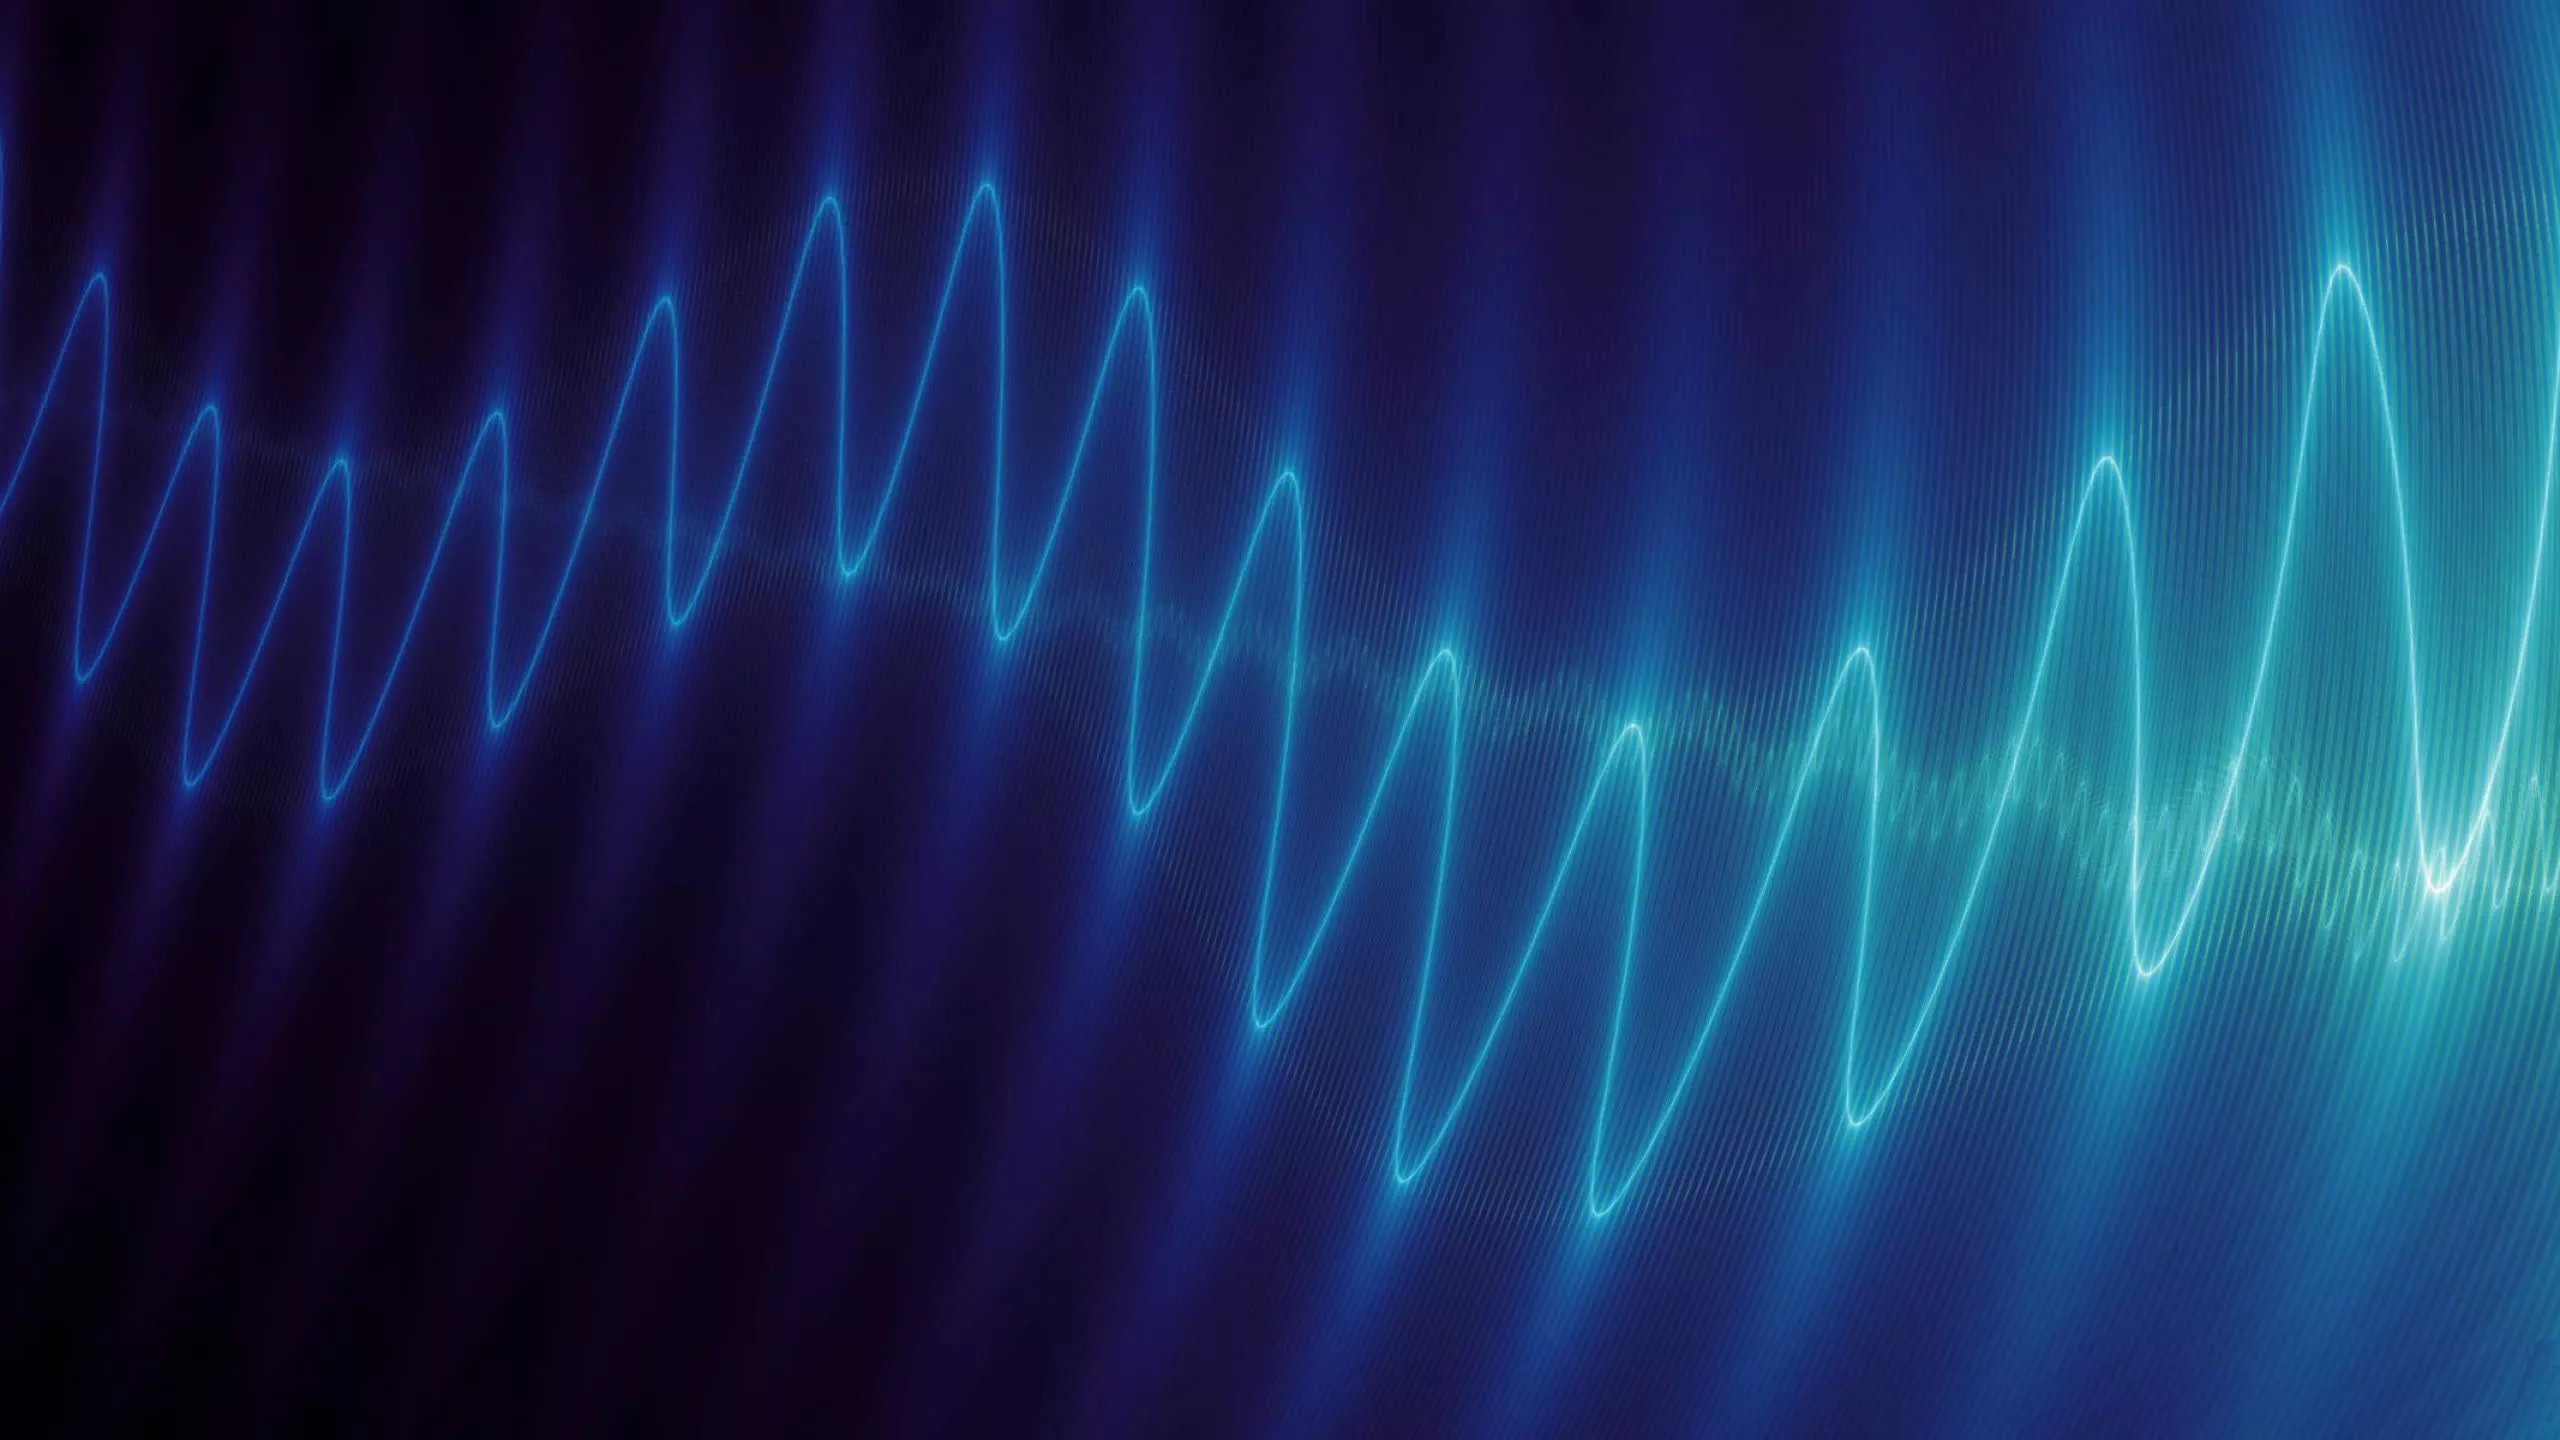 New ultrasonic attacks can issue malicious commands to voice assistants and smart home devices